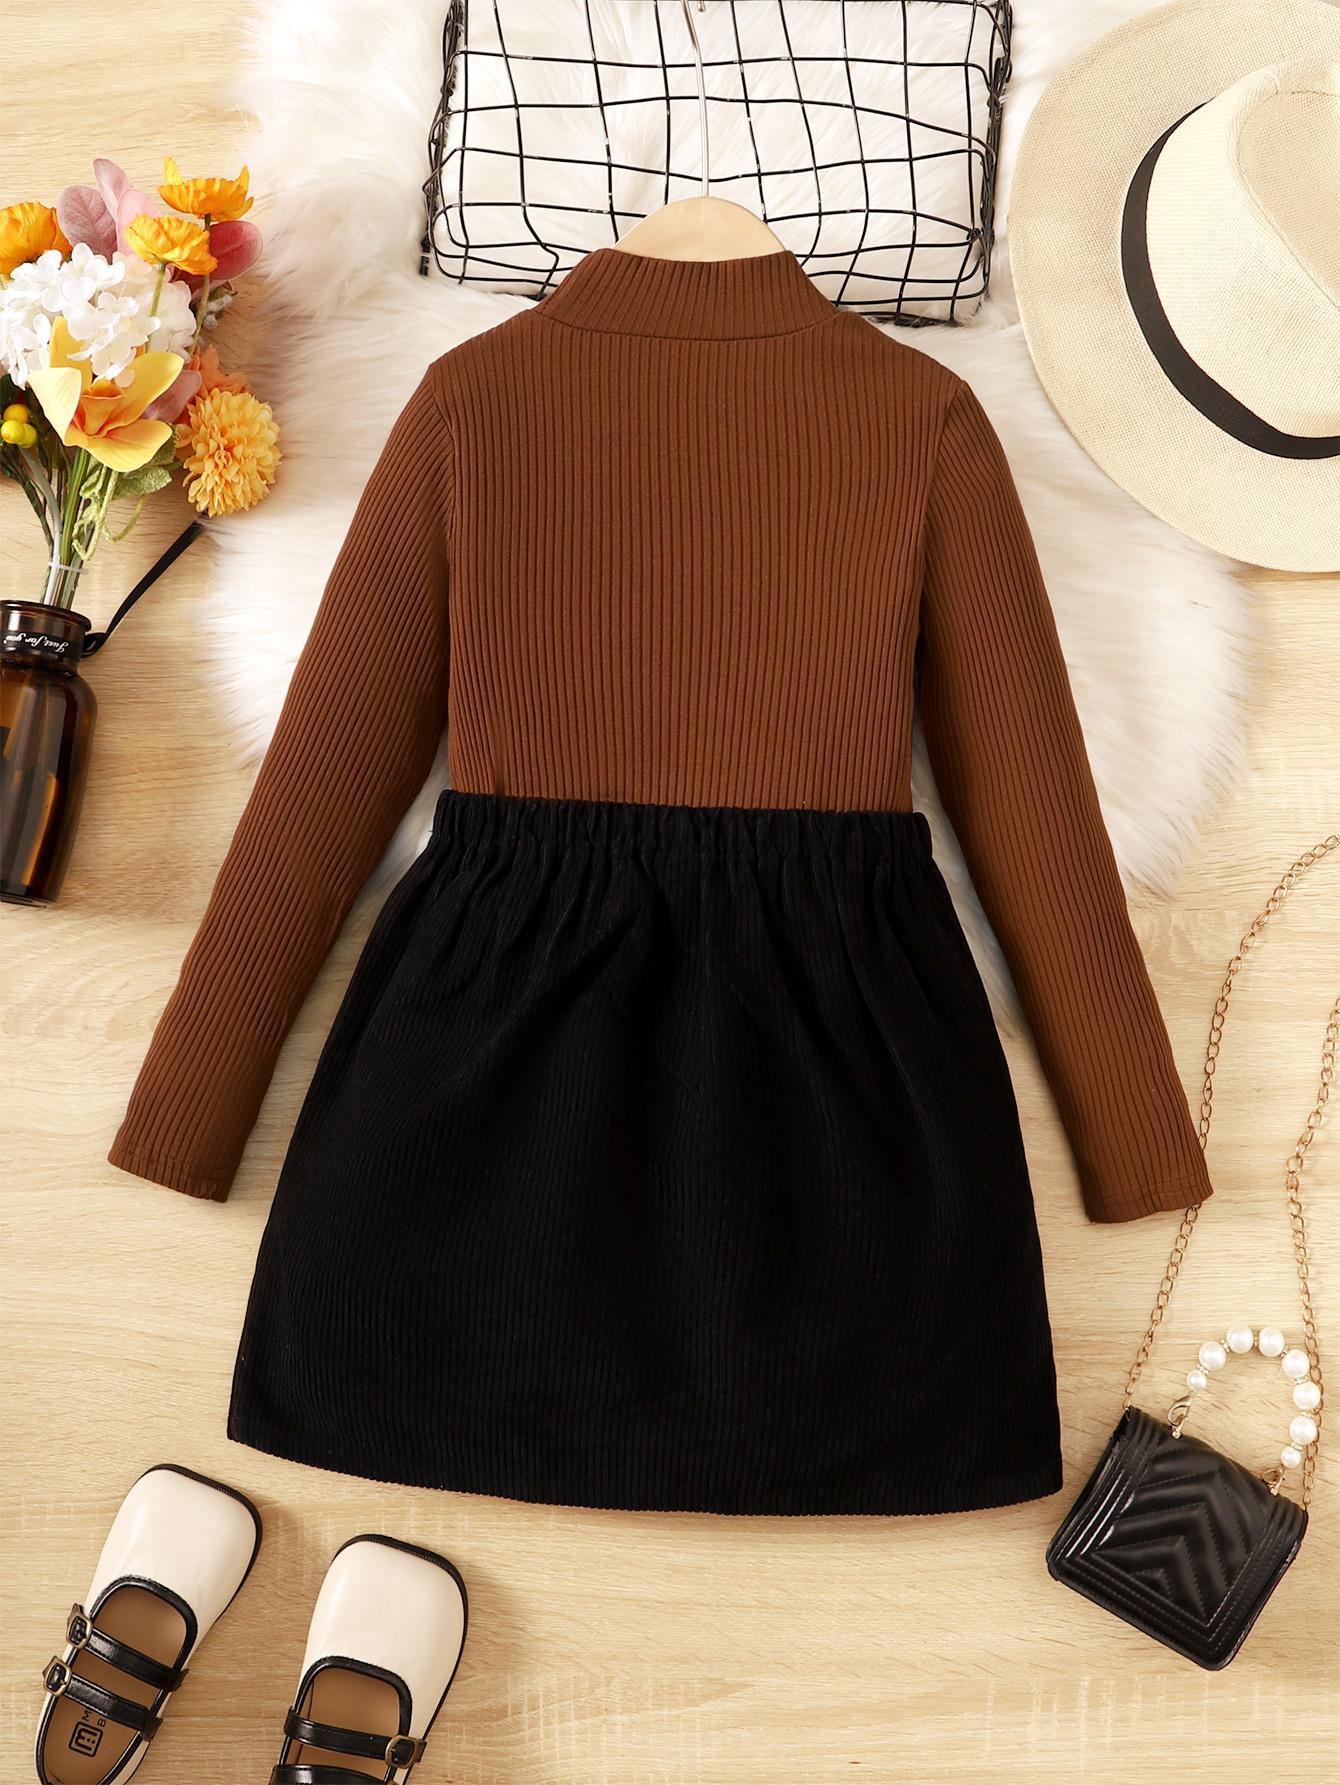 5-14Y Ready Stock Kids Clothes Girls Skirts Sets For Spring Autunmu Stand-up Collar Solid Color Tops Button Skirts 2Pcs Clothing From 5Y-14Y Brown Catpapa 462305005